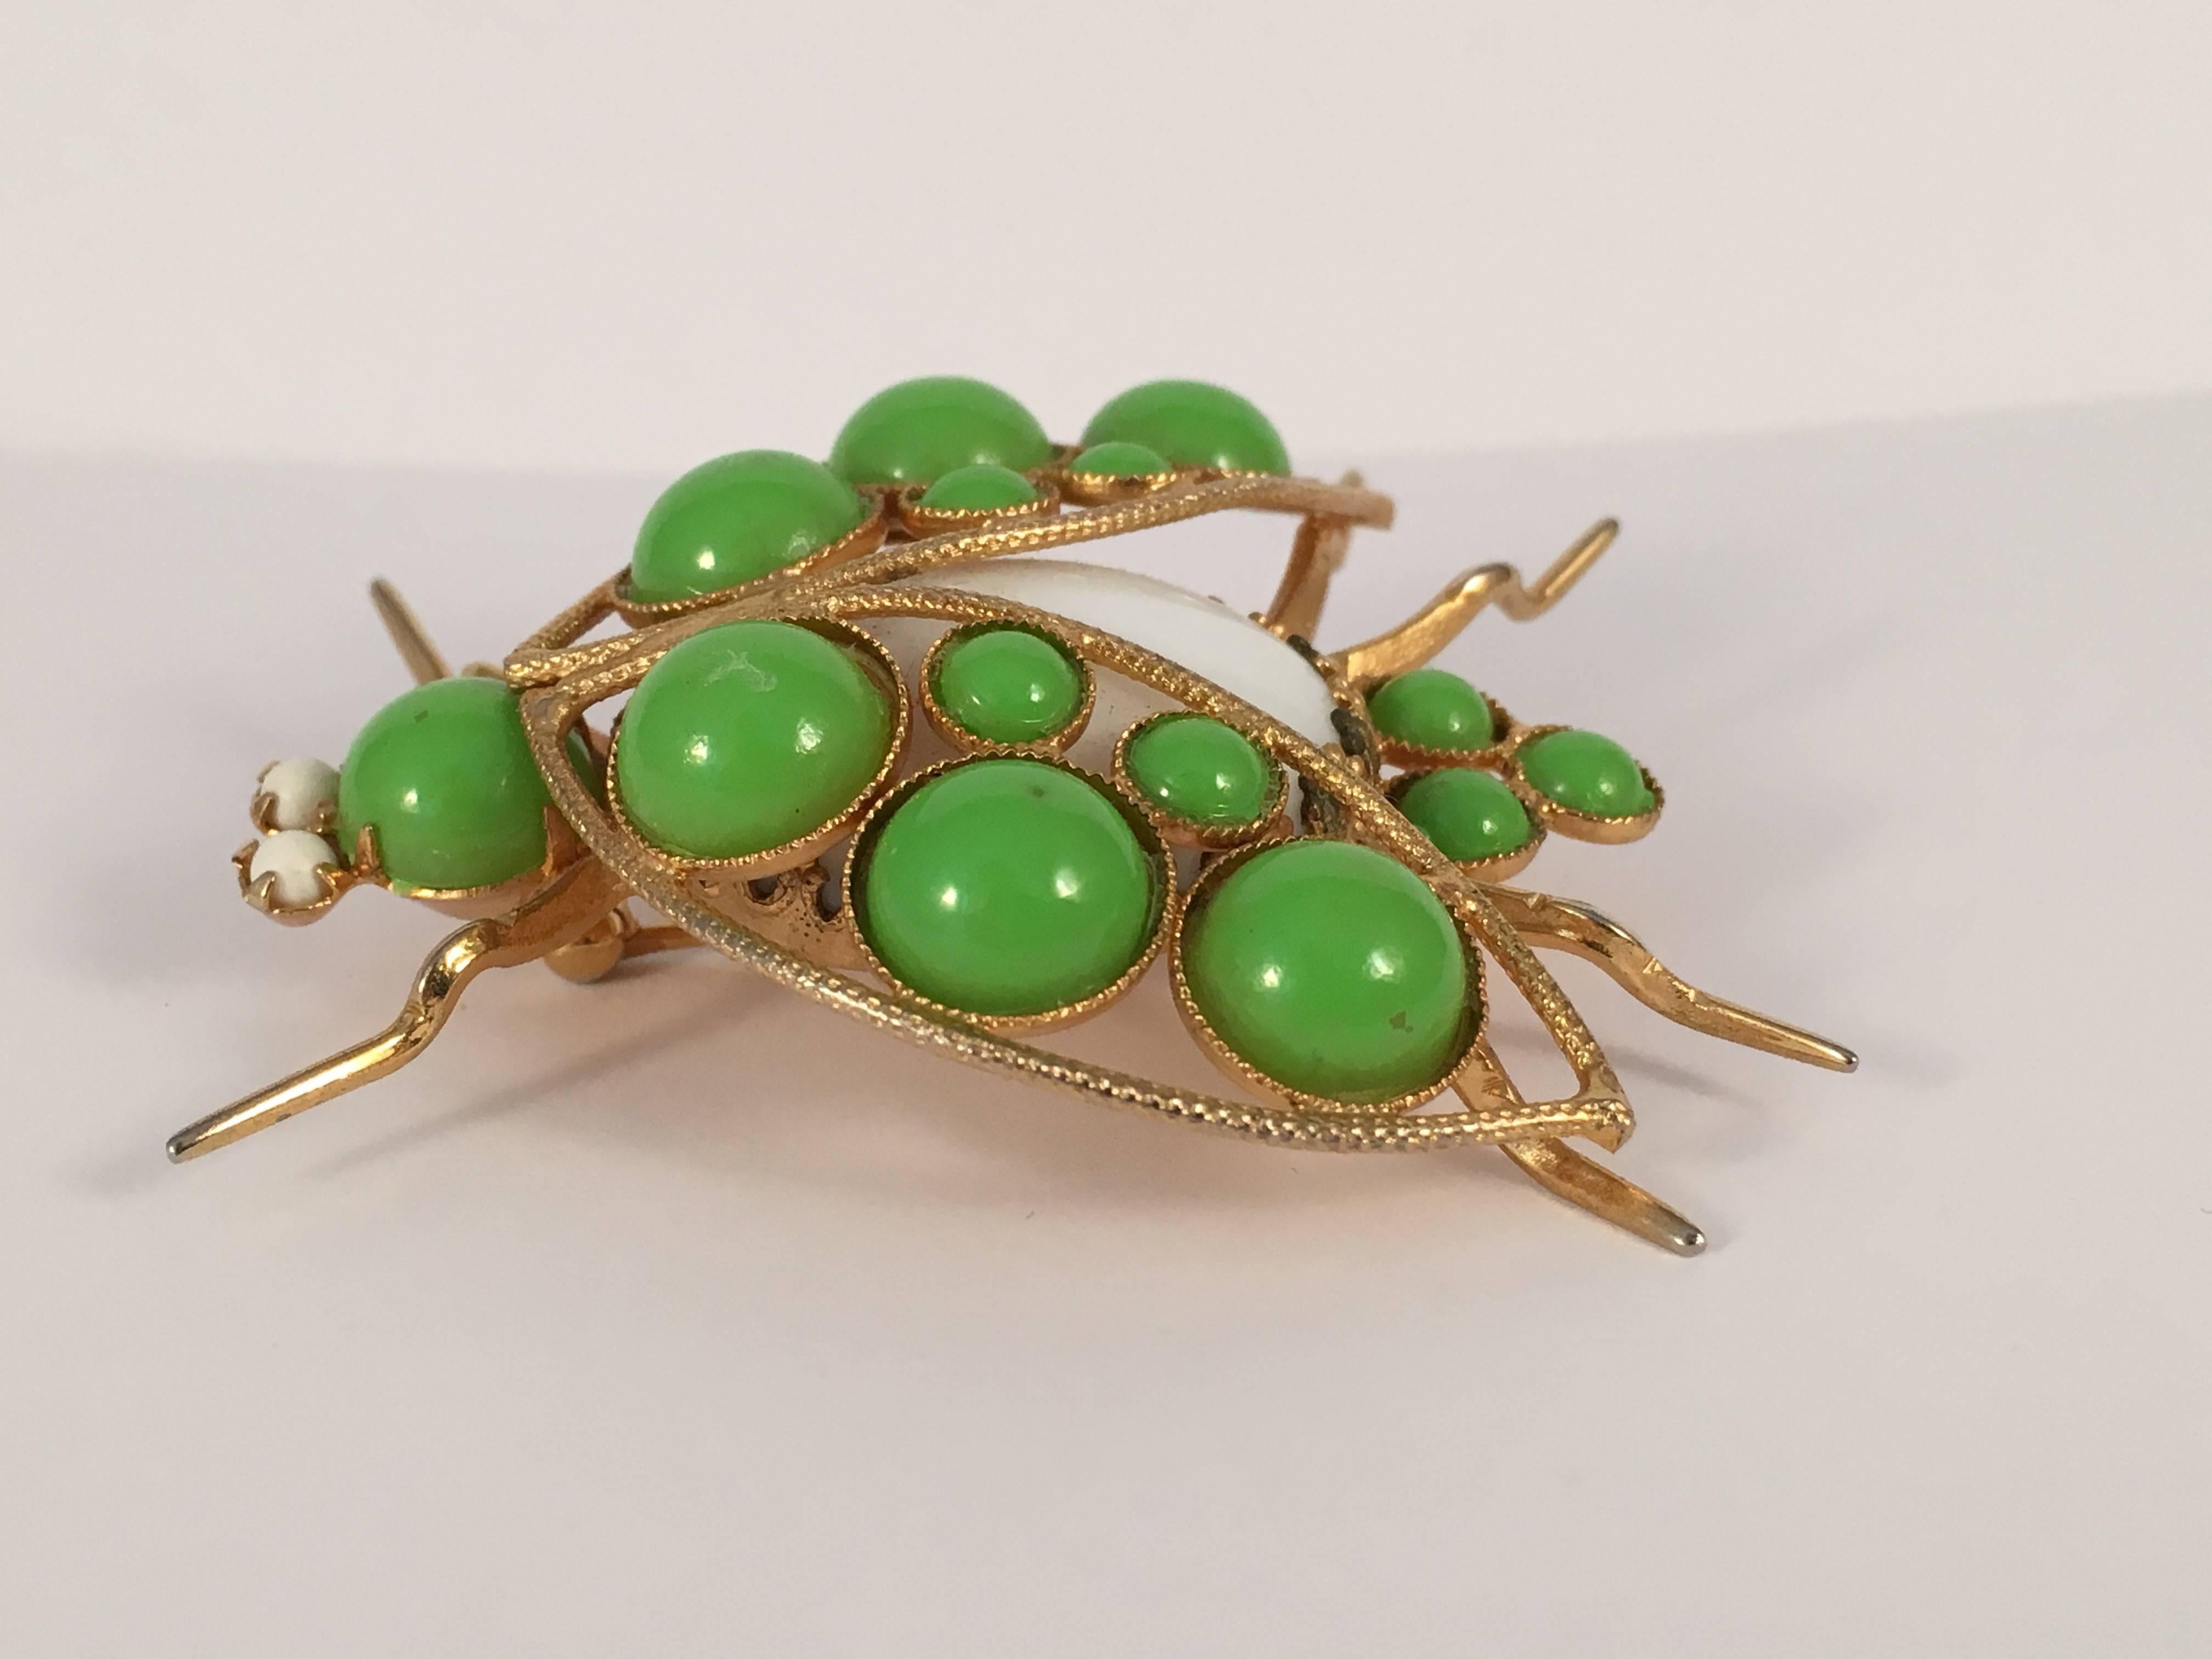 This is a green Kenneth Jay Lane bug brooch from the 1960s. The bug's body is made out of a white glass stone. The head and wings are made out of green resin beads. It measure 2 1/8